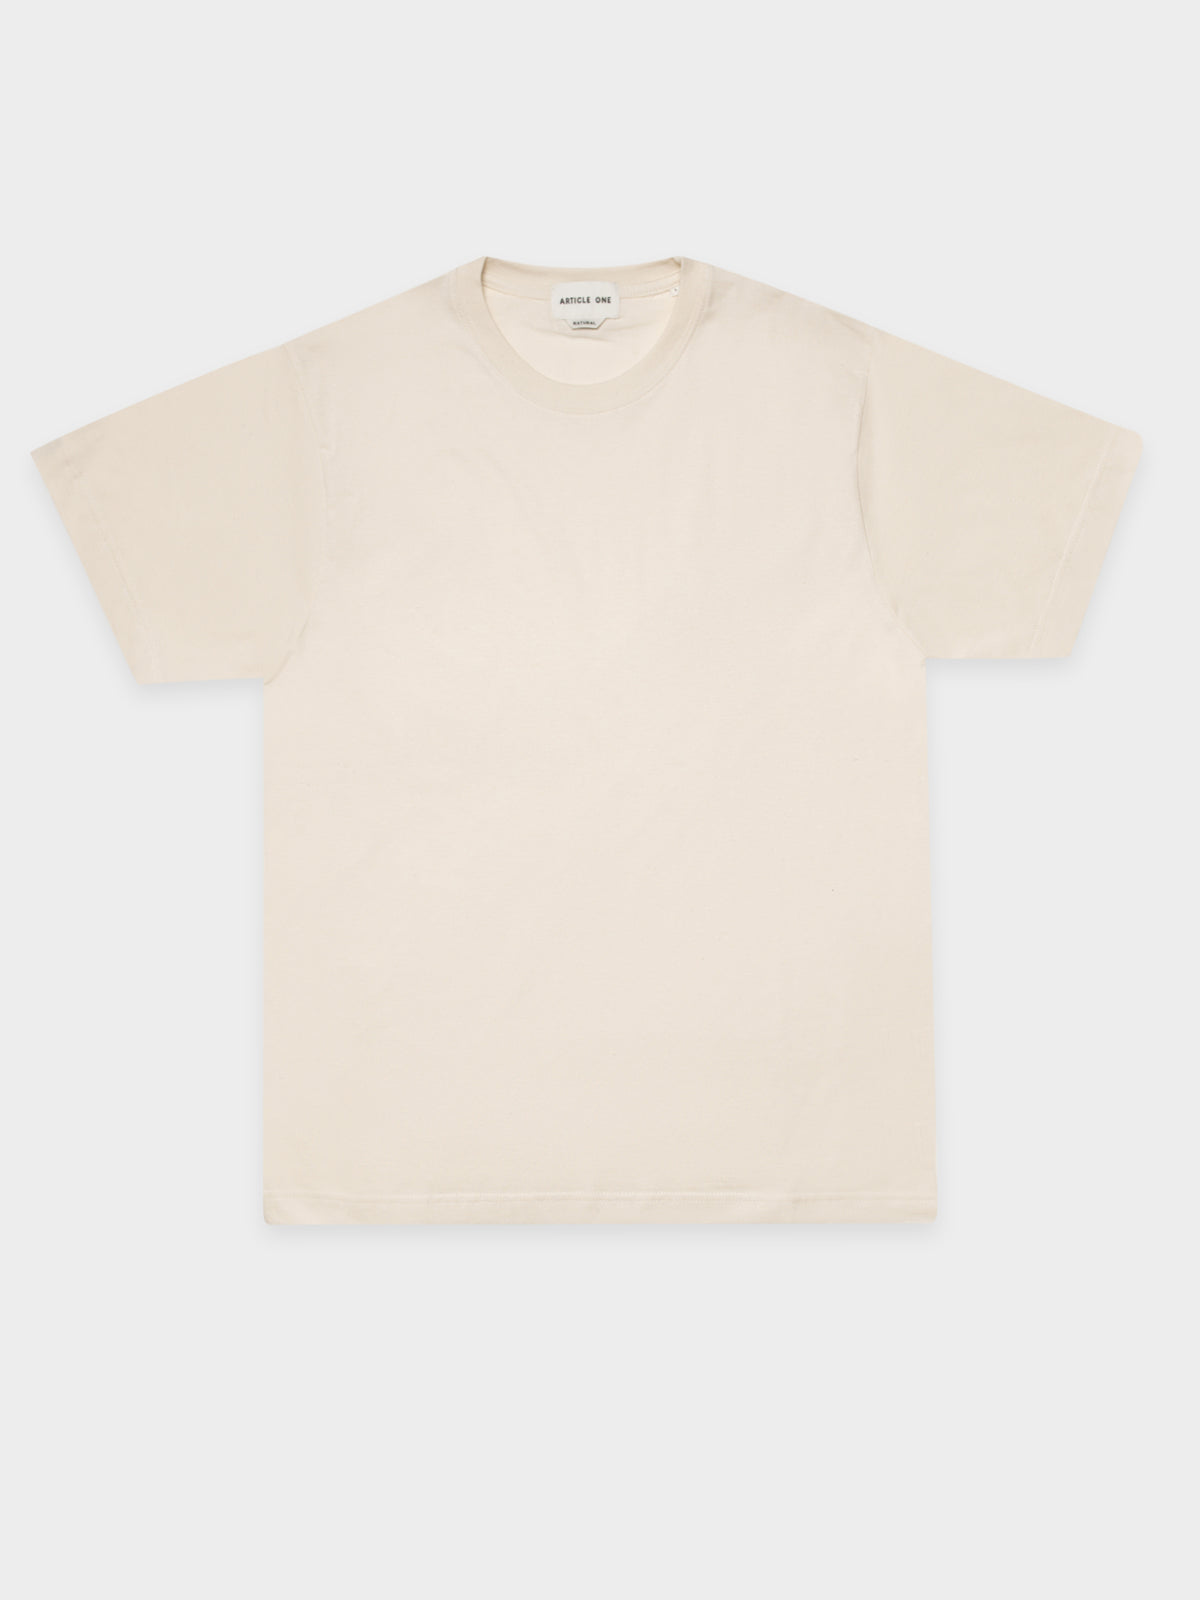 Classic T-Shirt in Natural